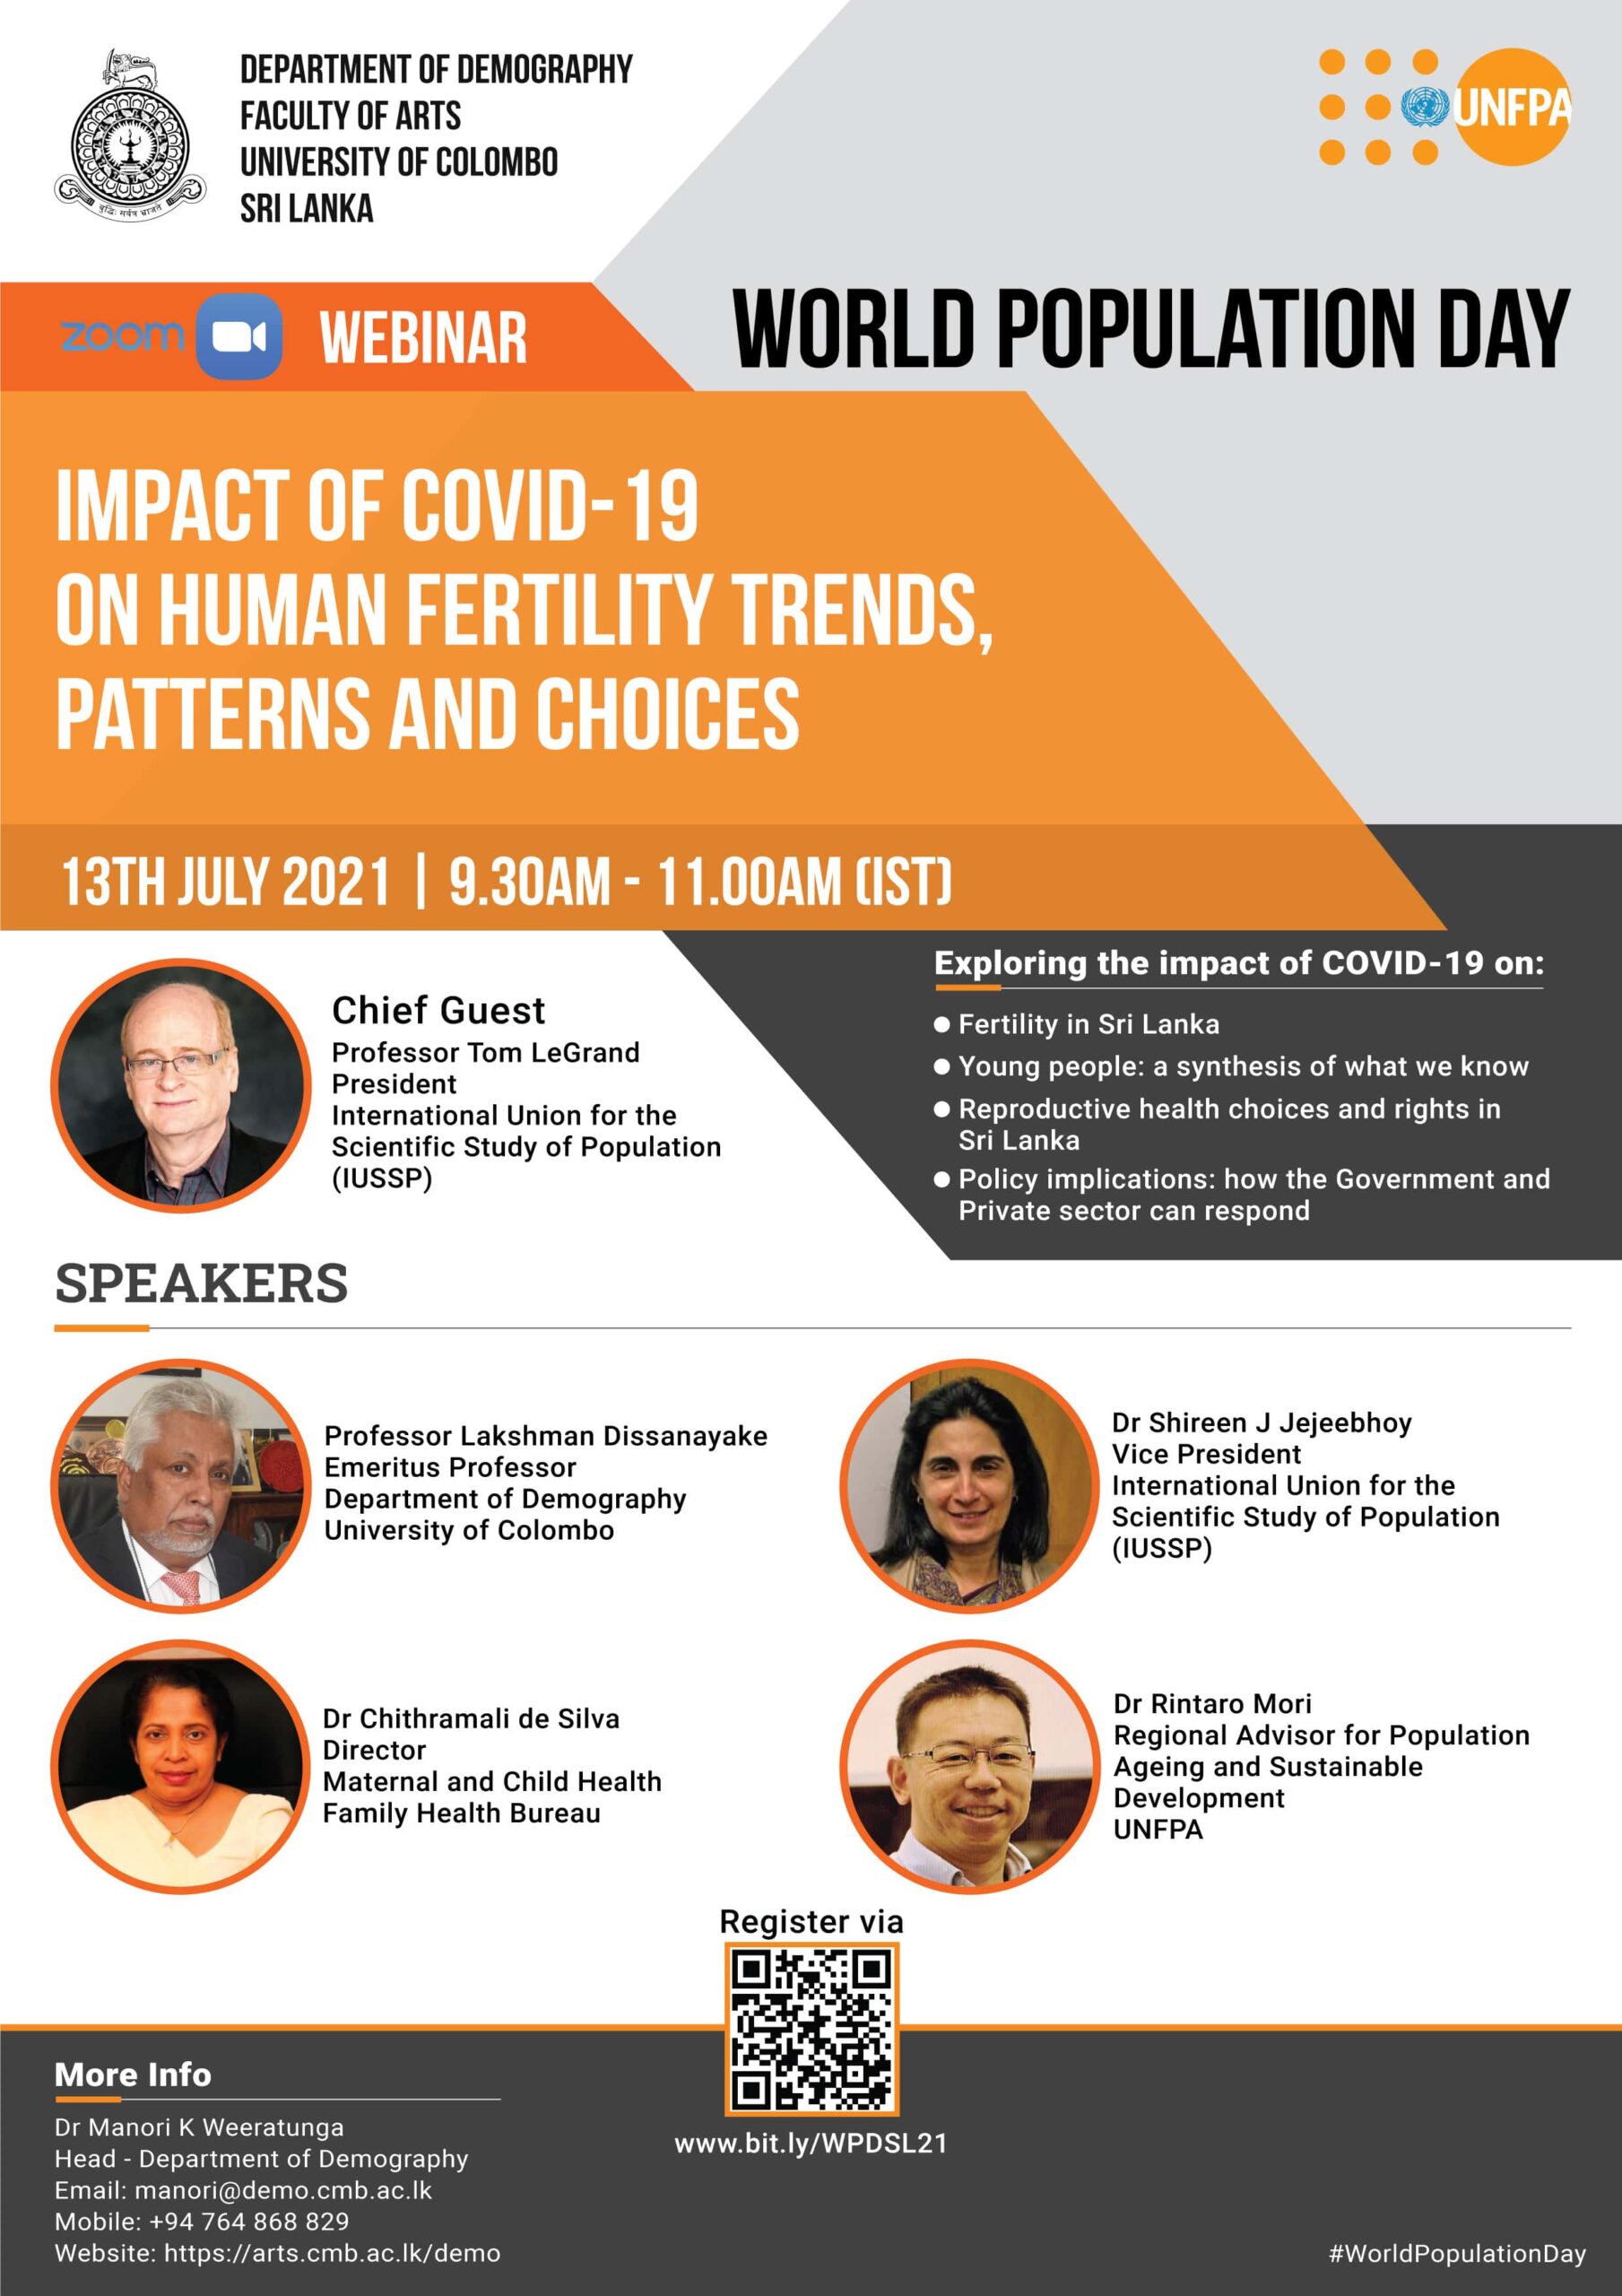 Webinar on Impact of COVID-19 on Human Fertility Trends, Patterns & Choices – 13th July